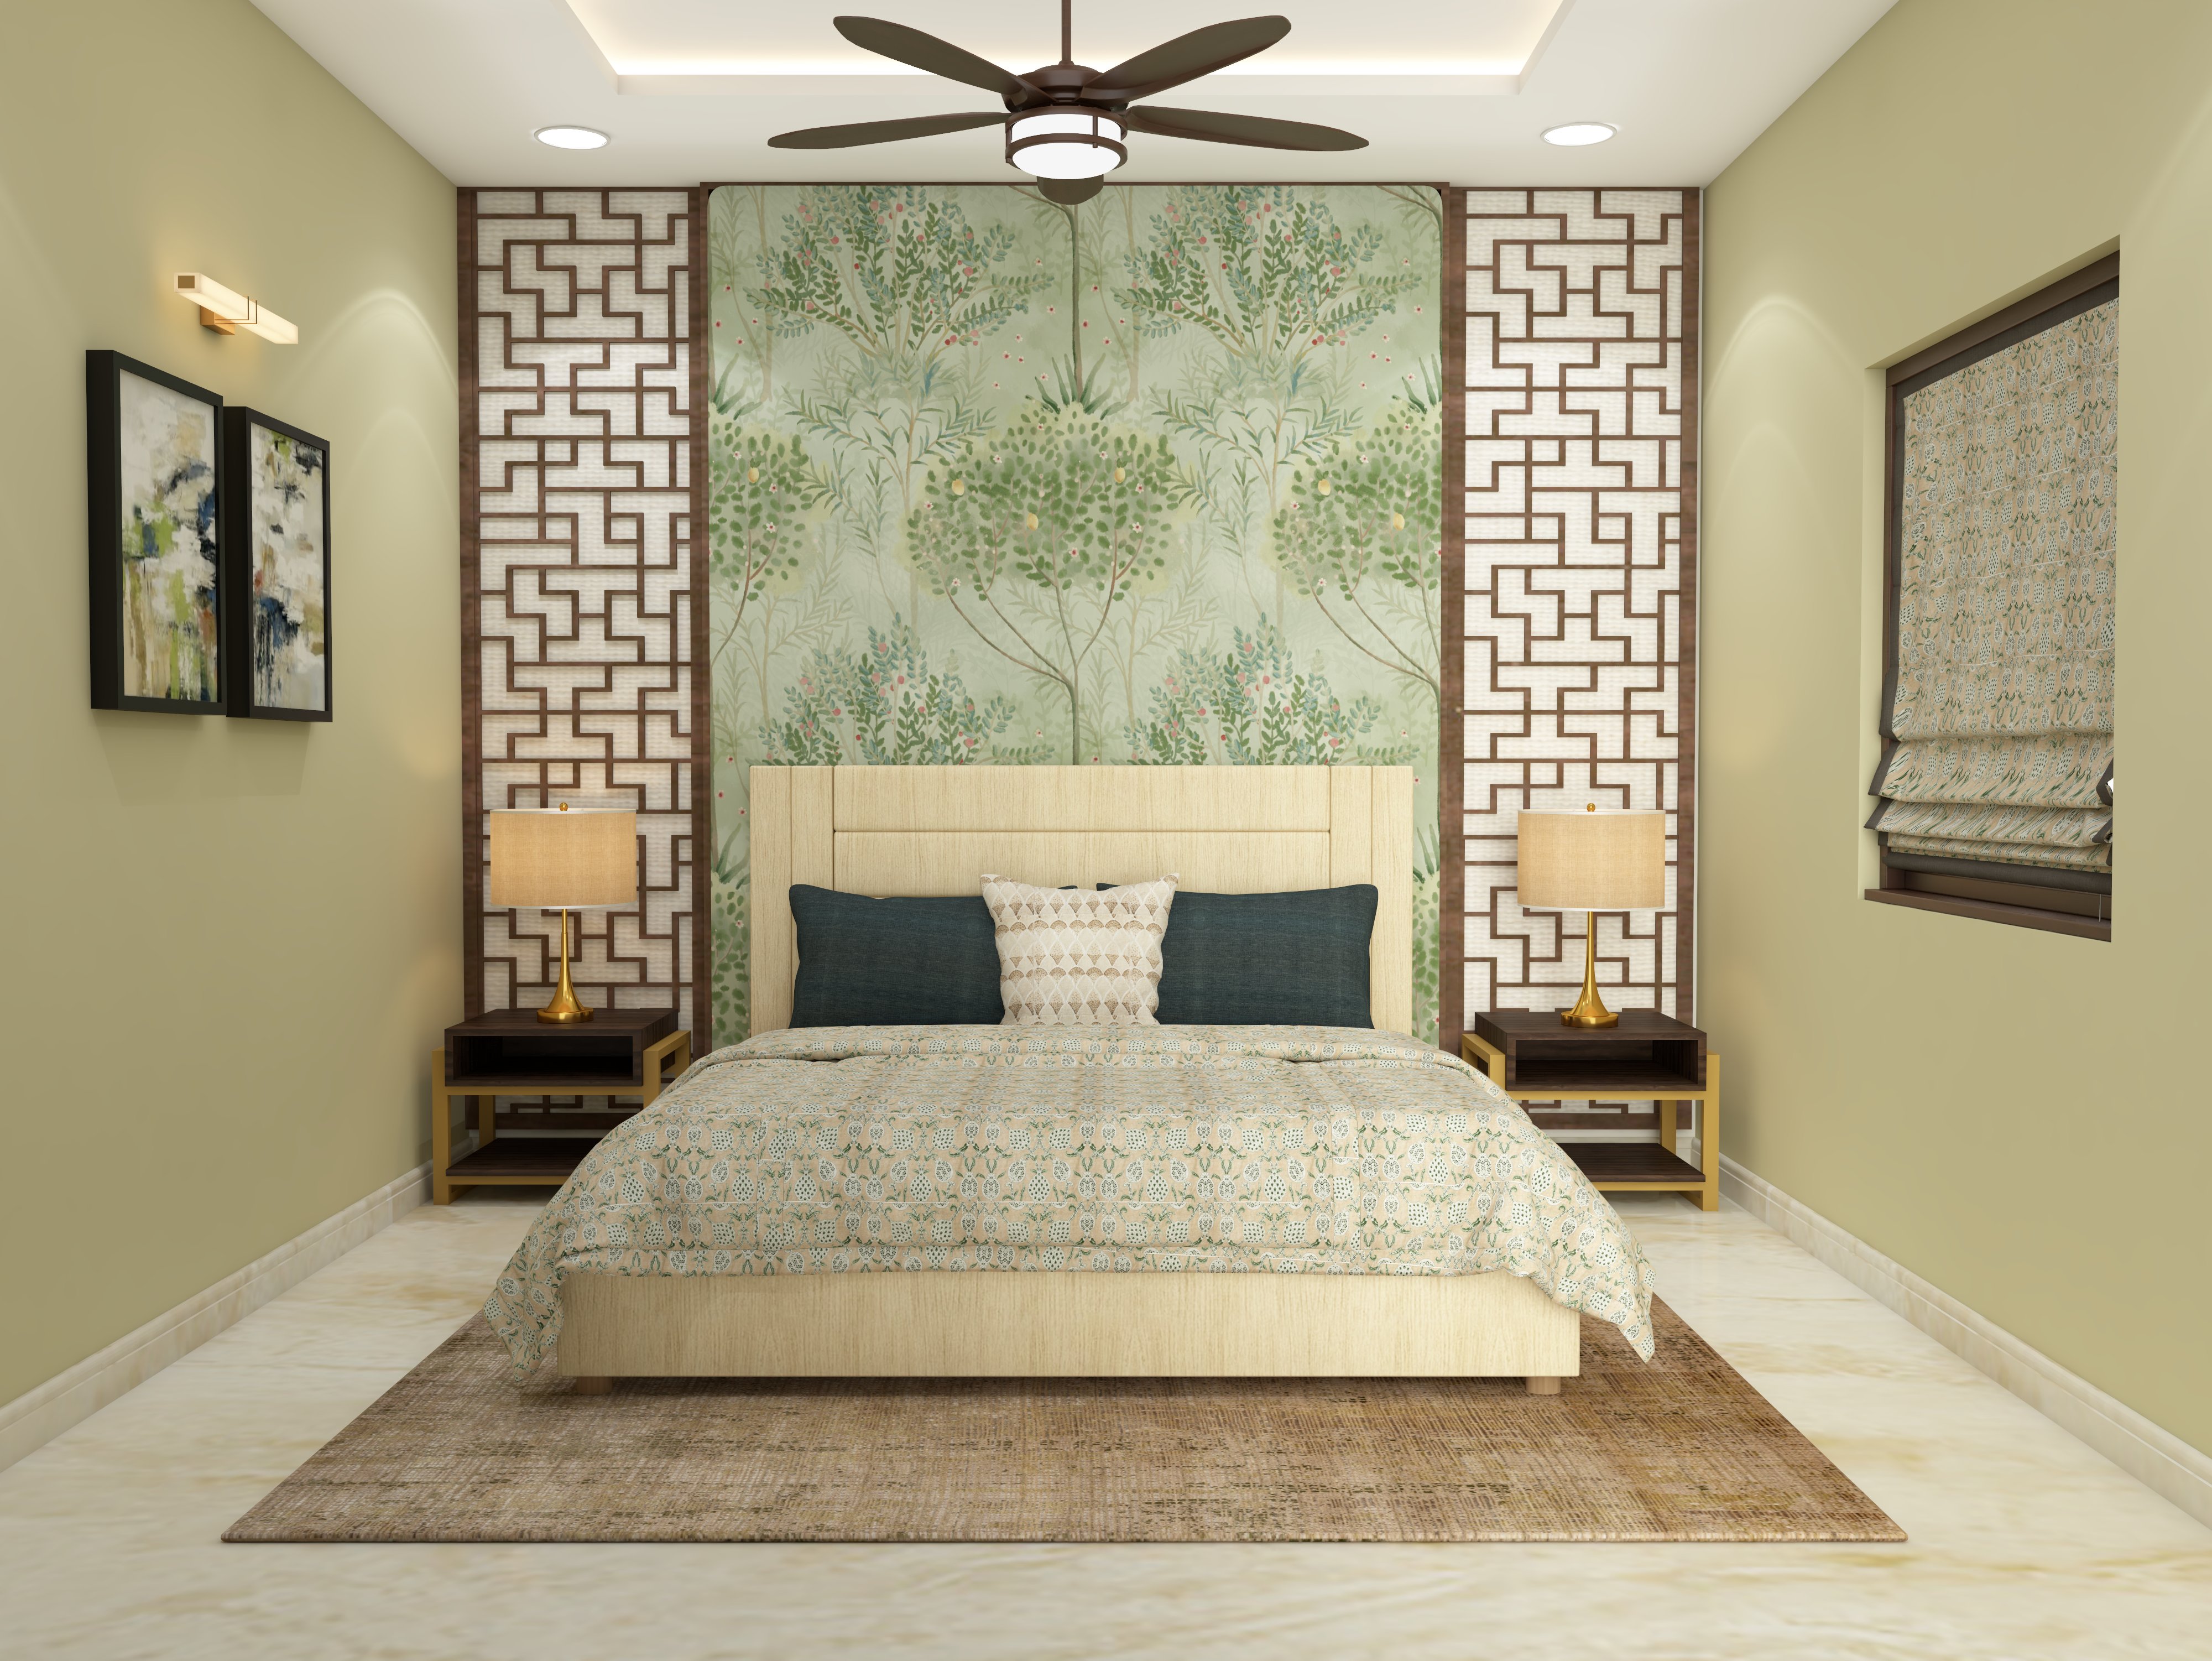 Tropical design bedroom with Yorskshire queen bed and Astaire side table along with white teak table lamp - Beautiful Homes